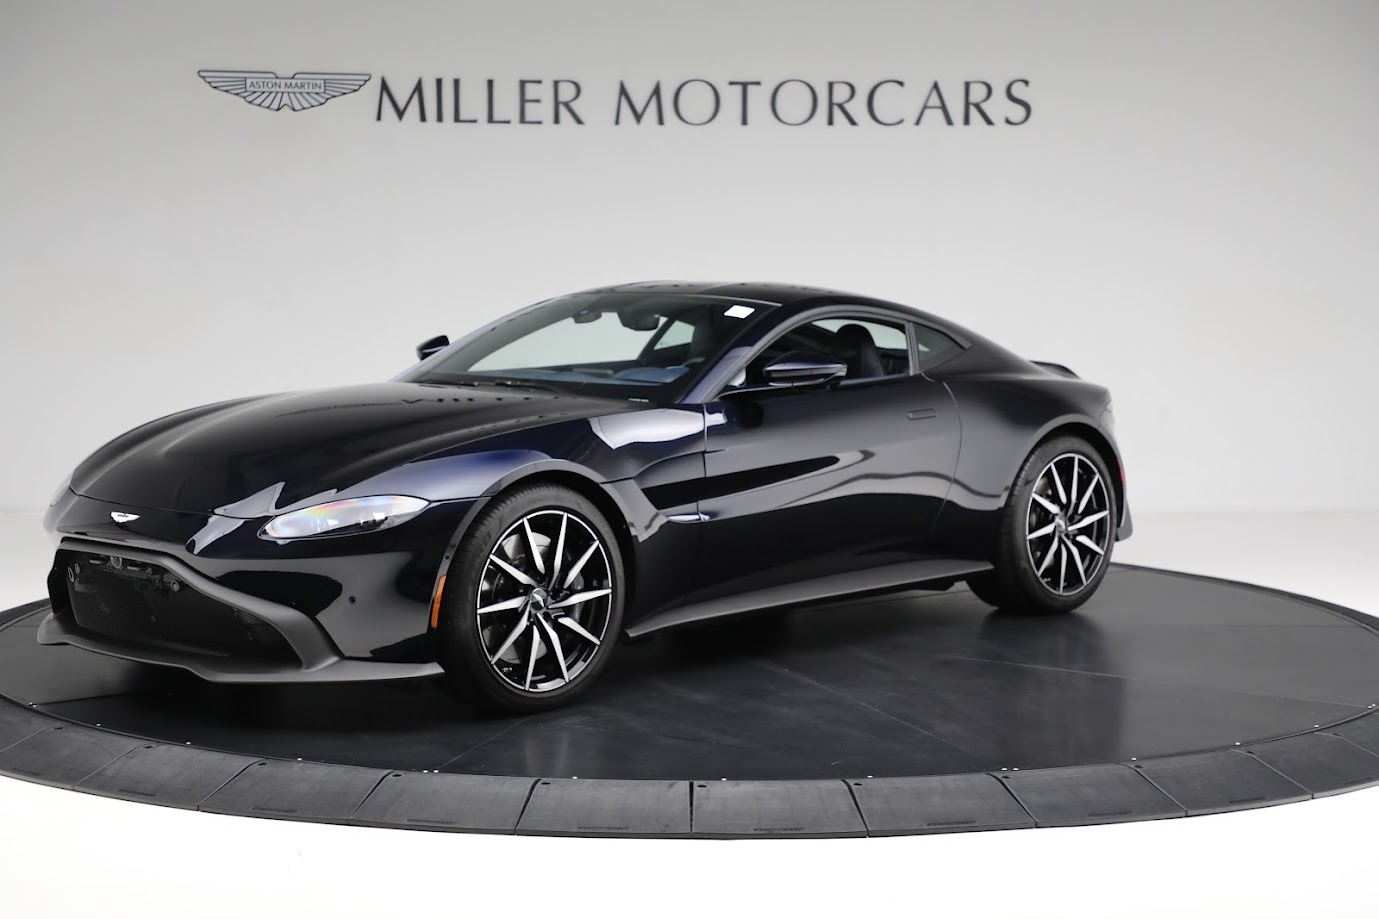 Used 2020 Aston Martin Vantage for sale Sold at Alfa Romeo of Greenwich in Greenwich CT 06830 1